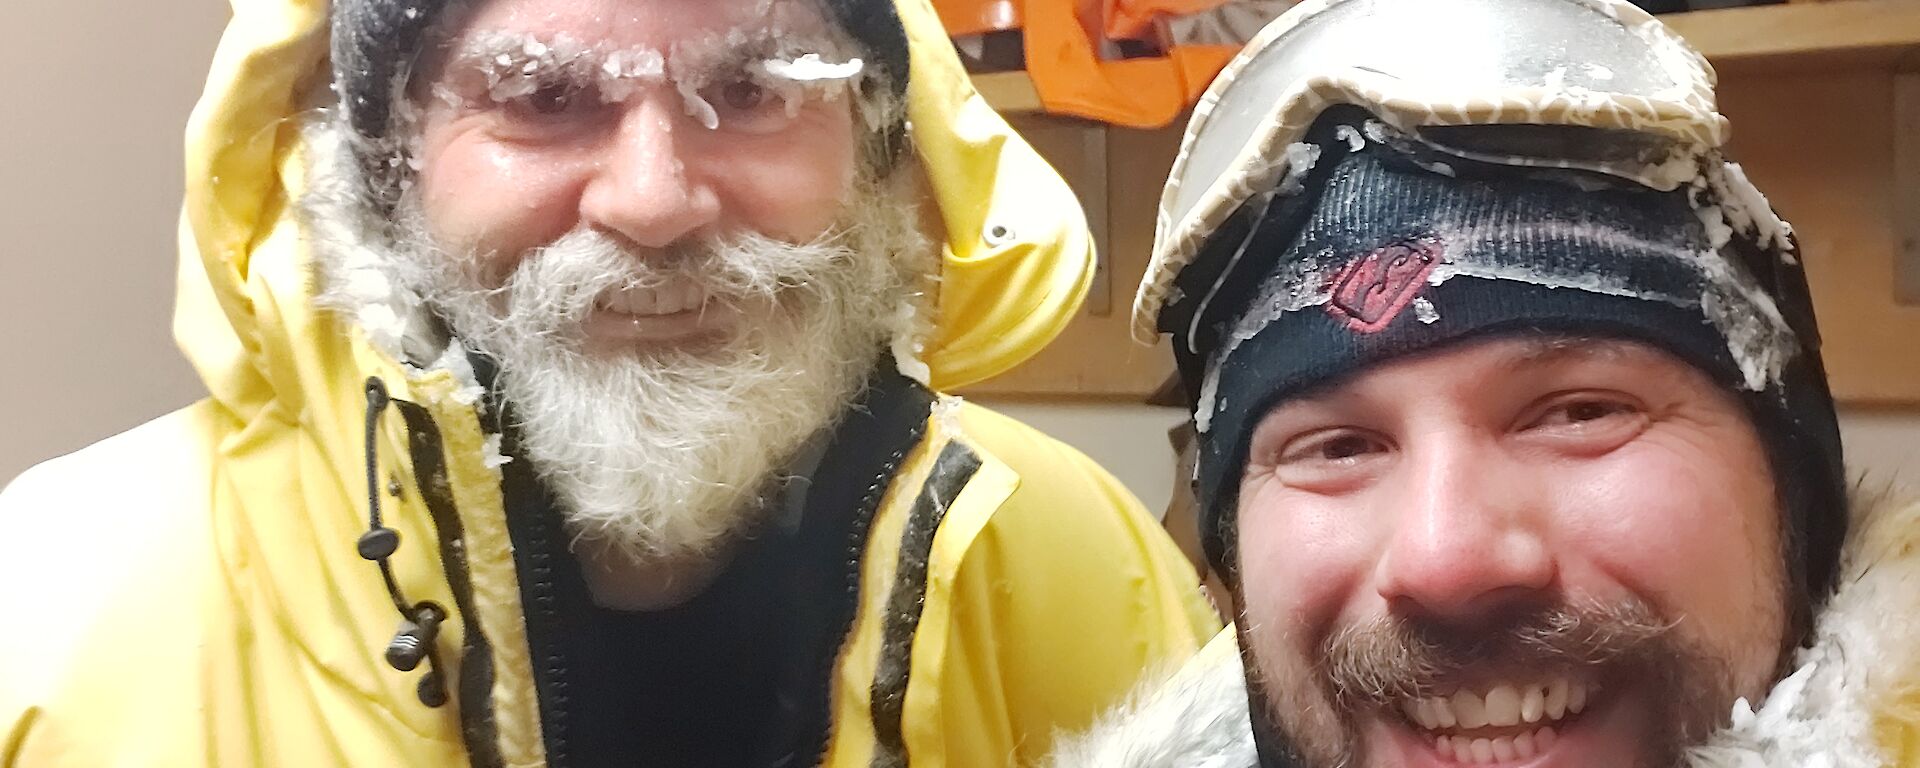 Two expeditioners with ice on their clothes and gear